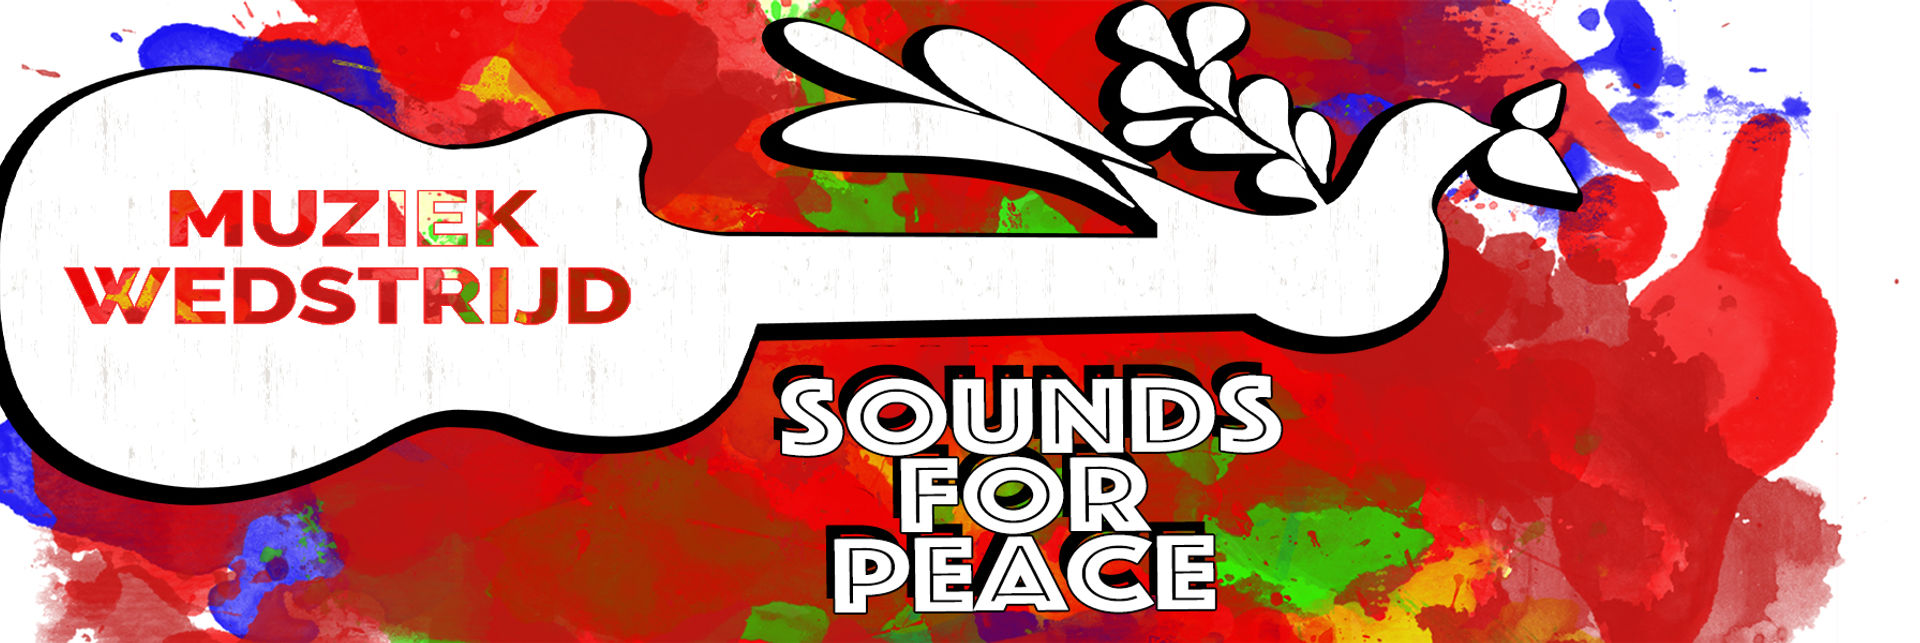 Sounds For Peace